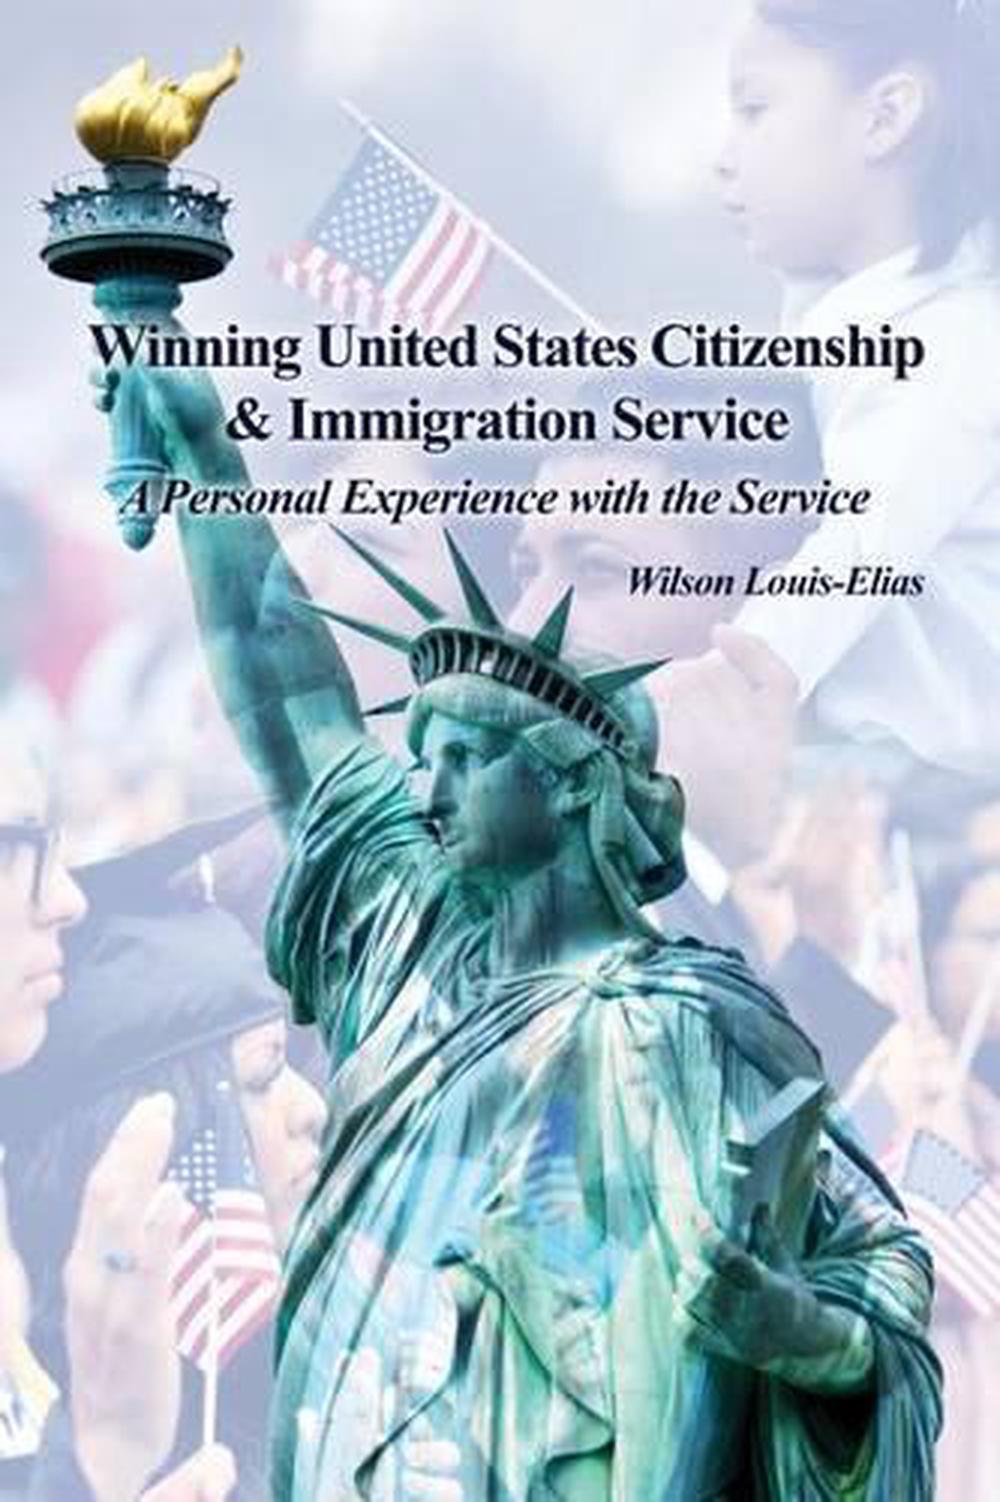 dating site for us citizenship and immigration services